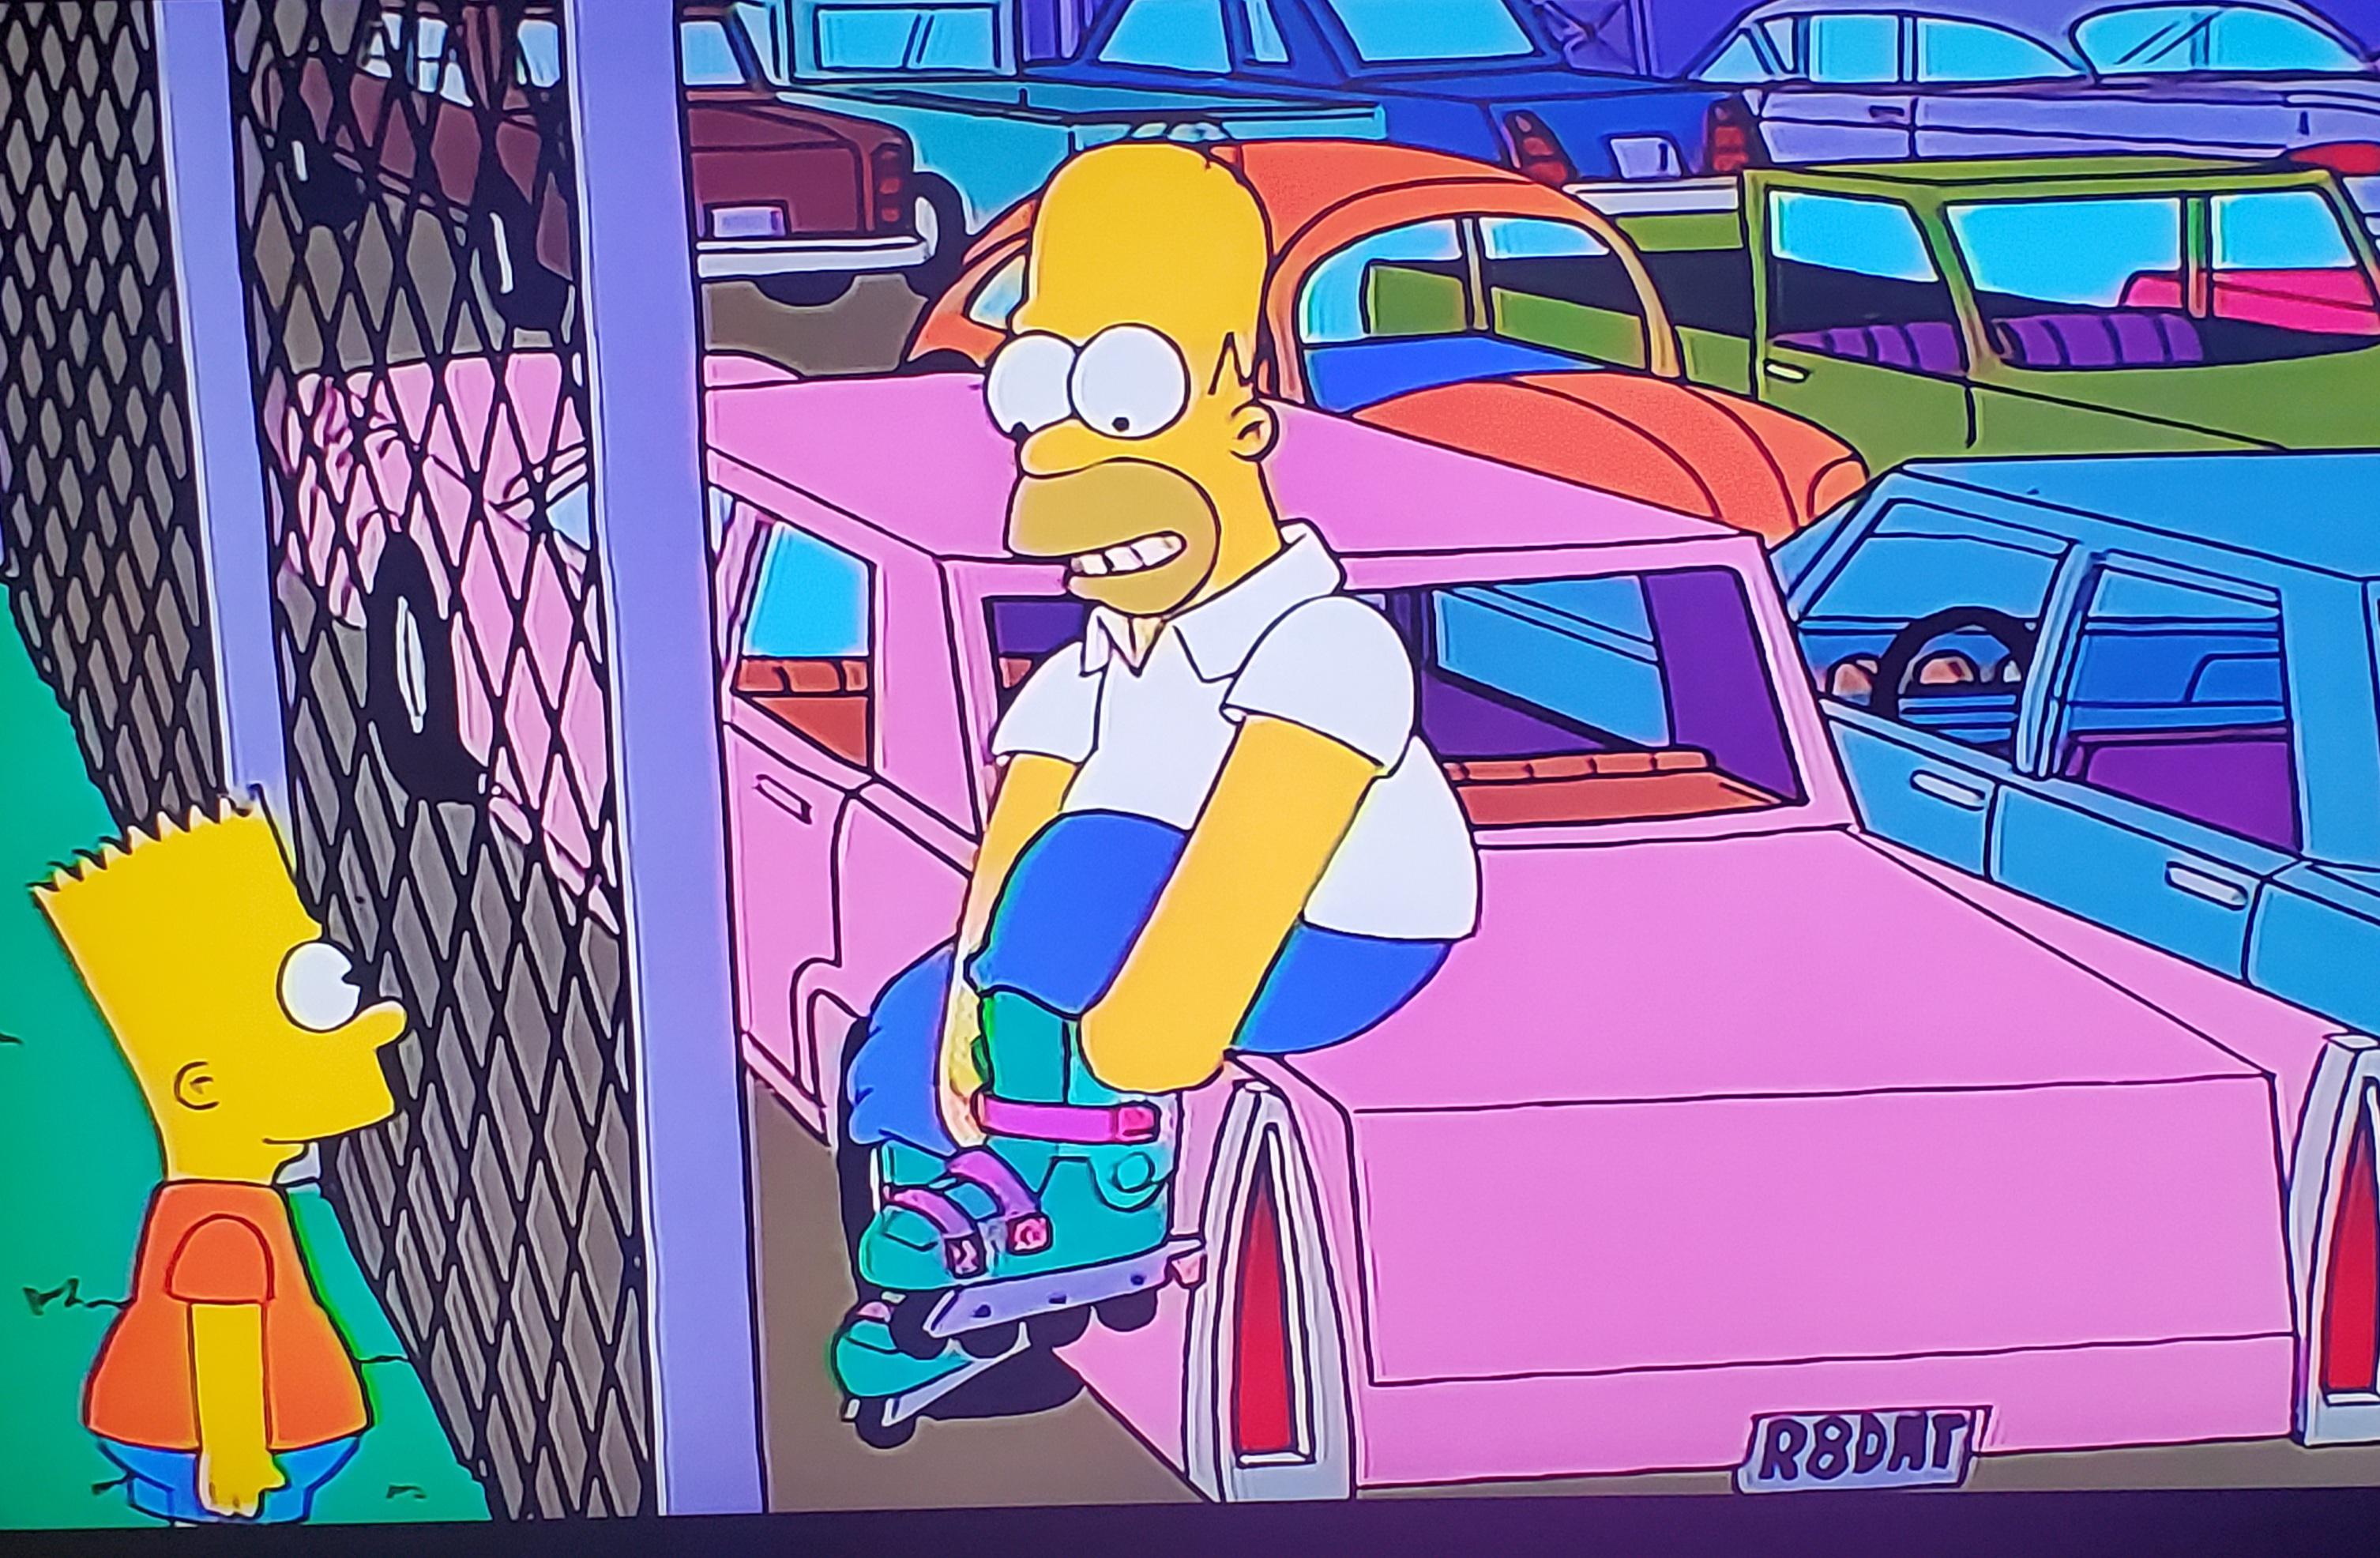 It's been 26 years and I just noticed Homer the Great's license plate says 'Radiant'